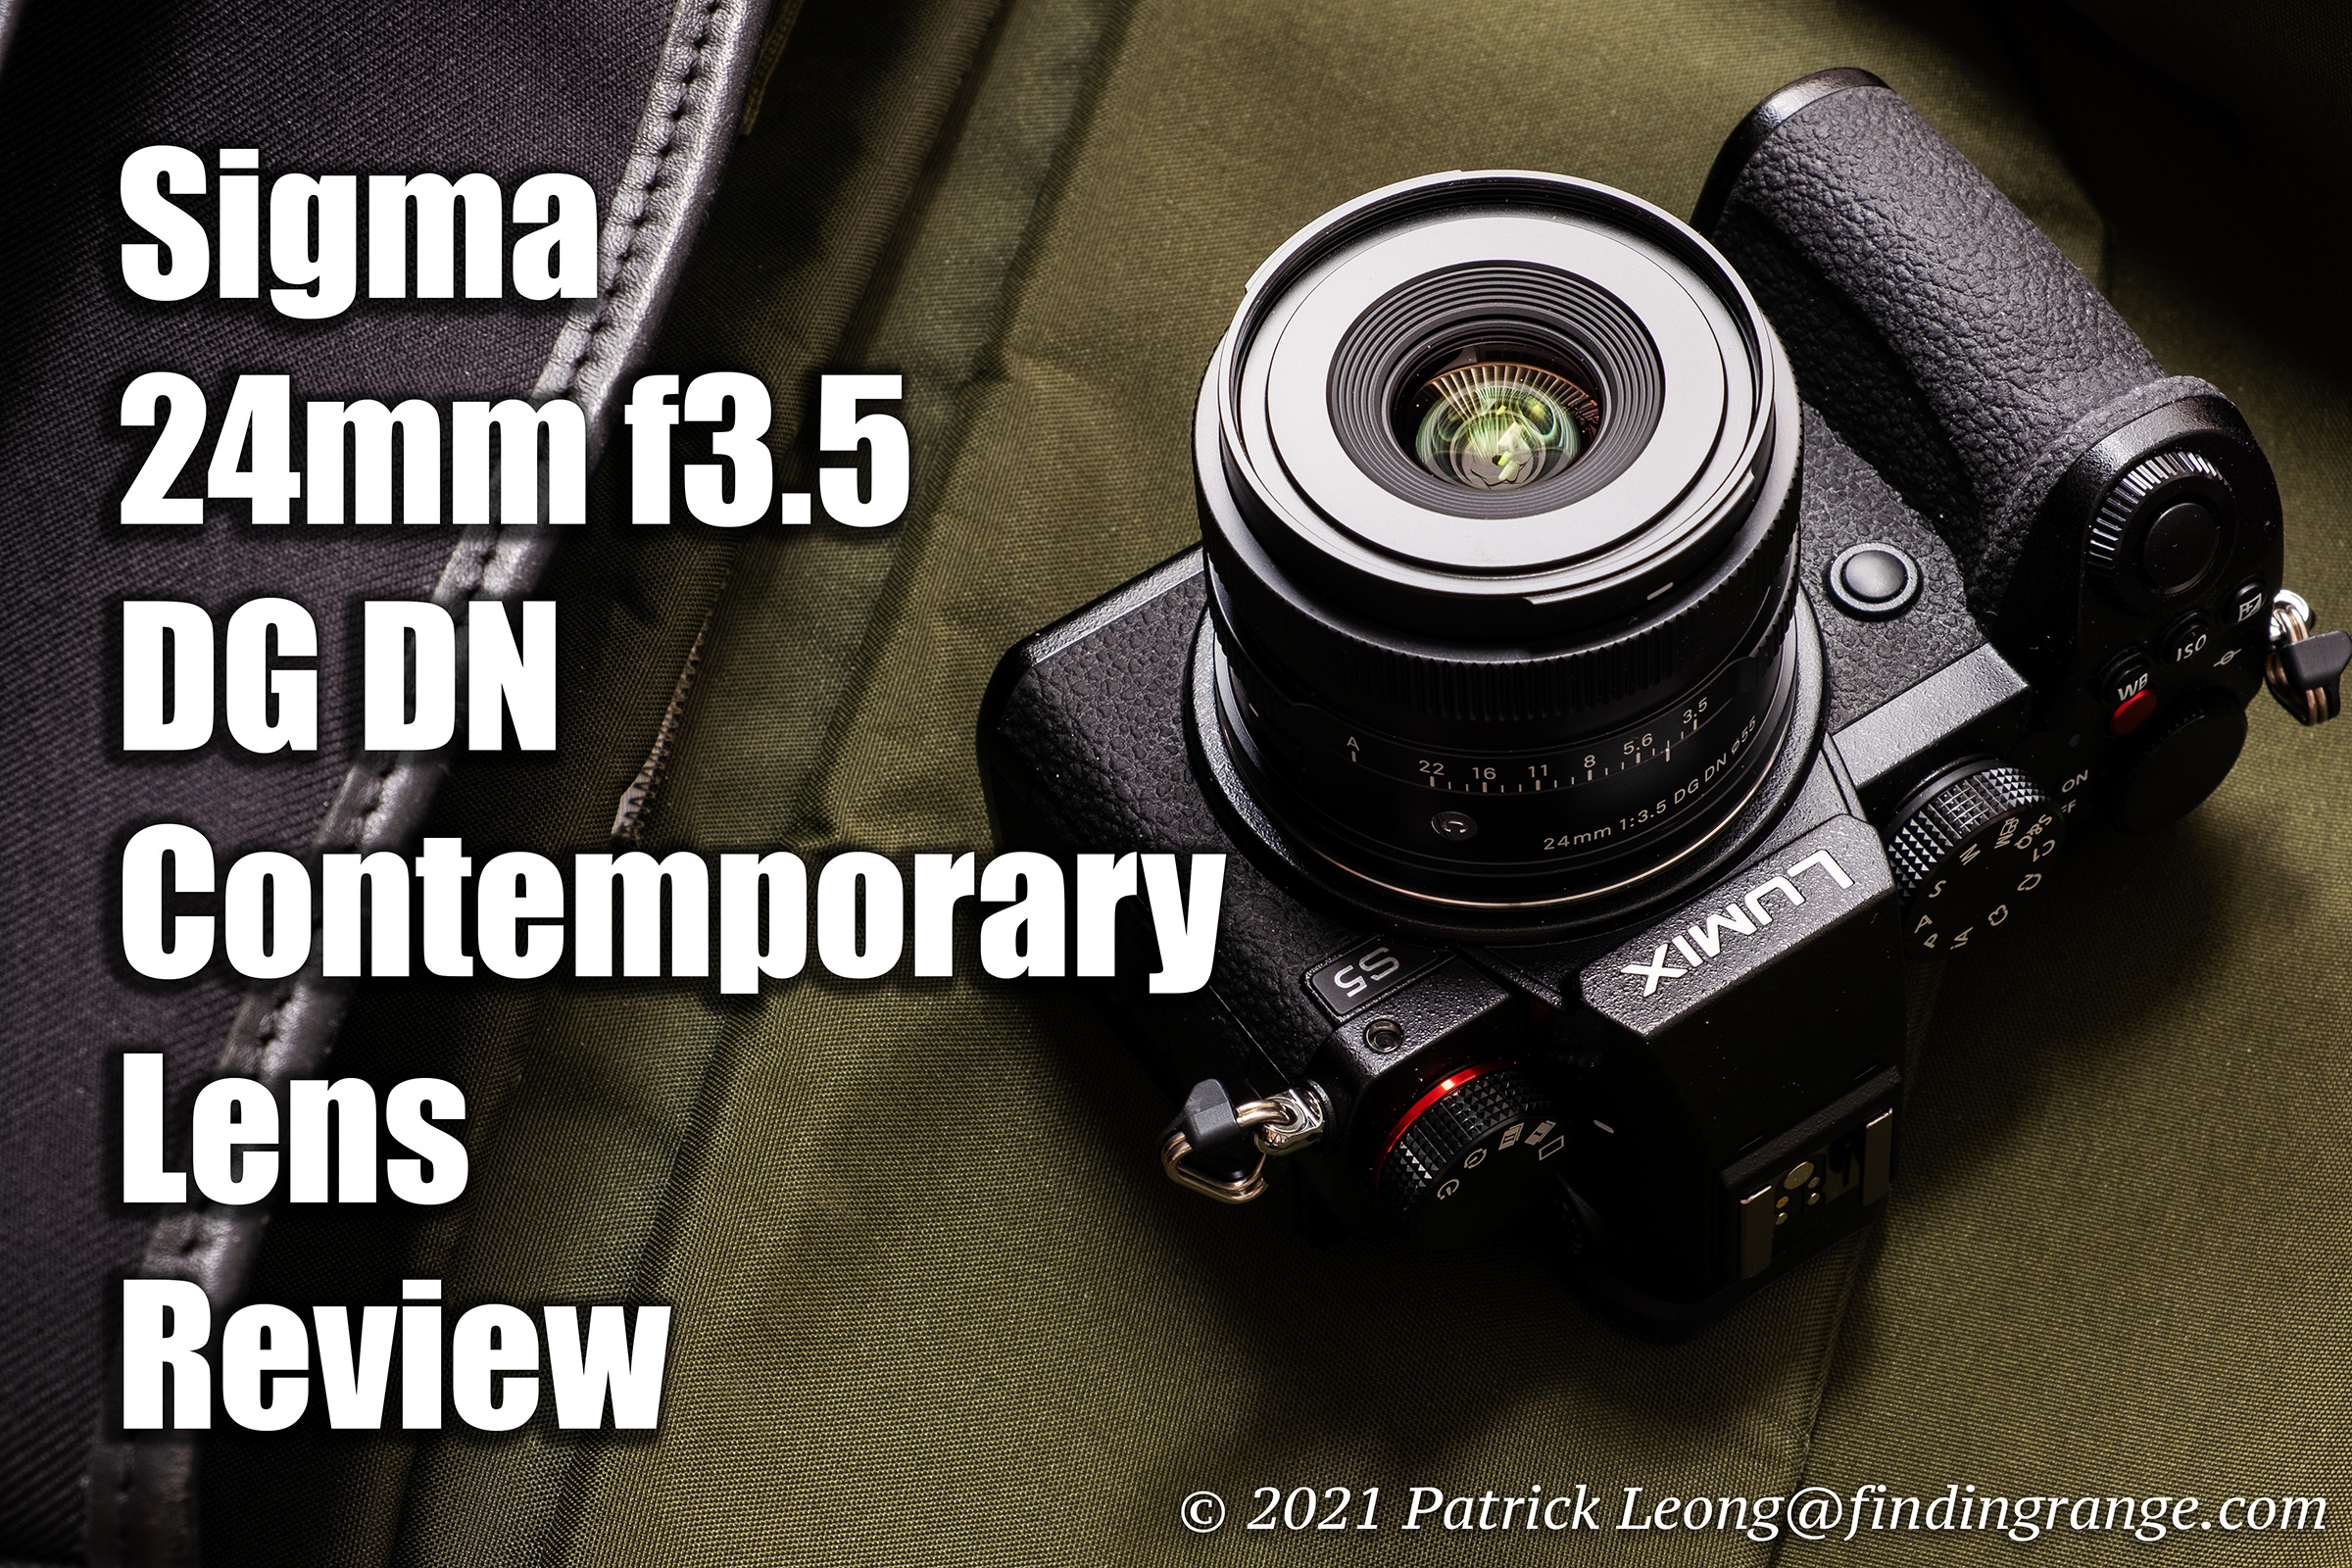 Sigma 24mm f3.5 DG DN Contemporary Lens Review - Finding Range